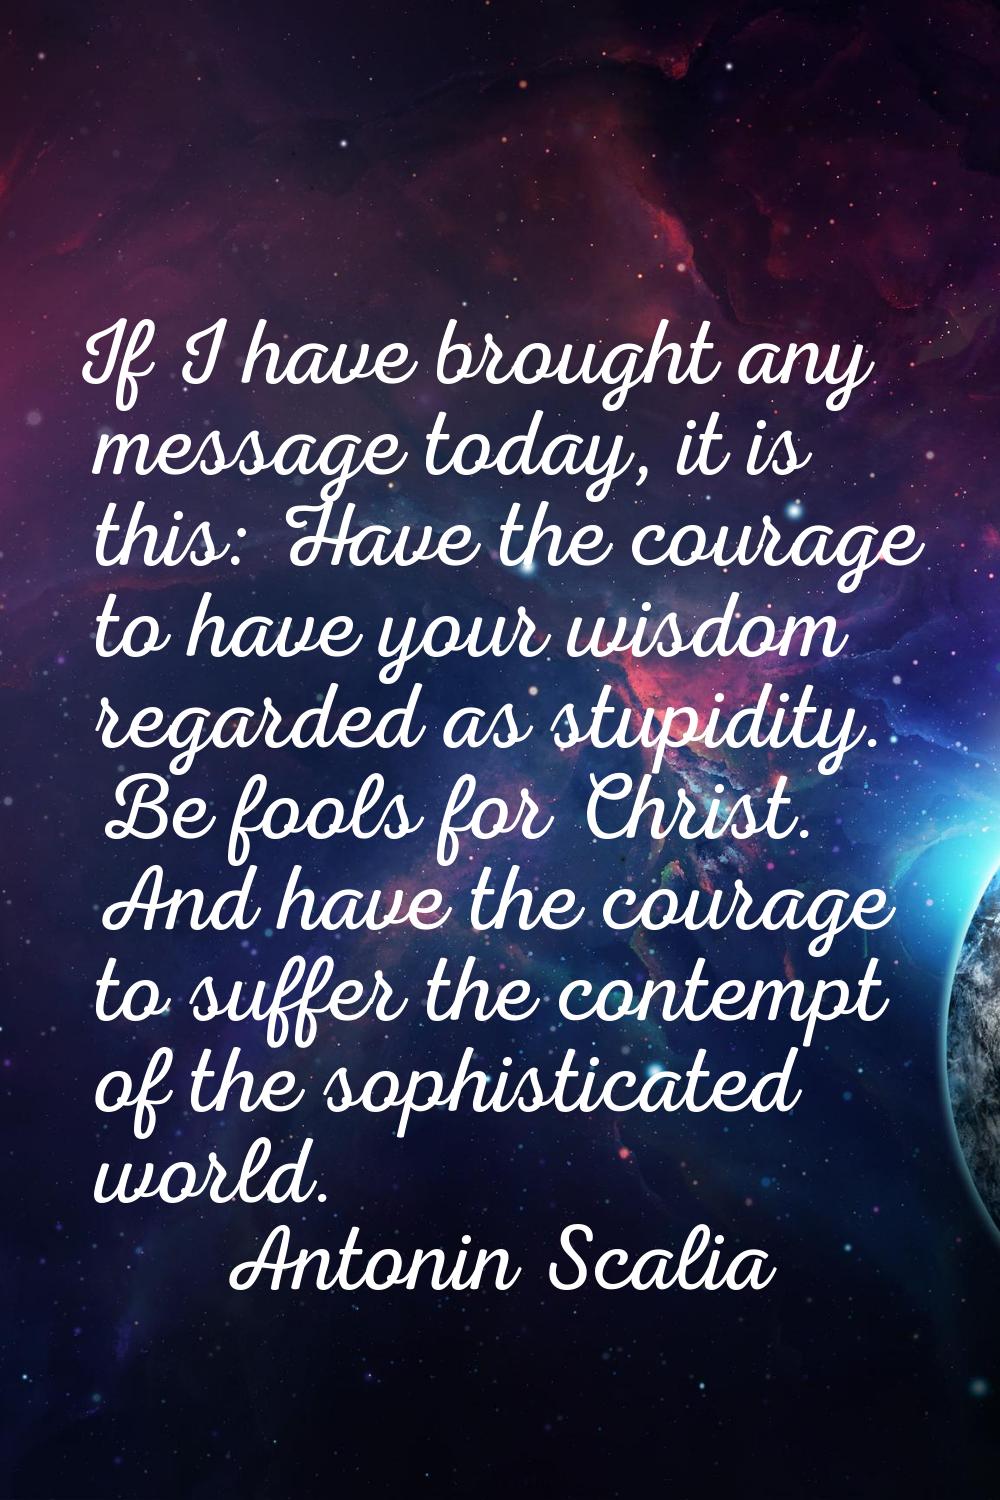 If I have brought any message today, it is this: Have the courage to have your wisdom regarded as s